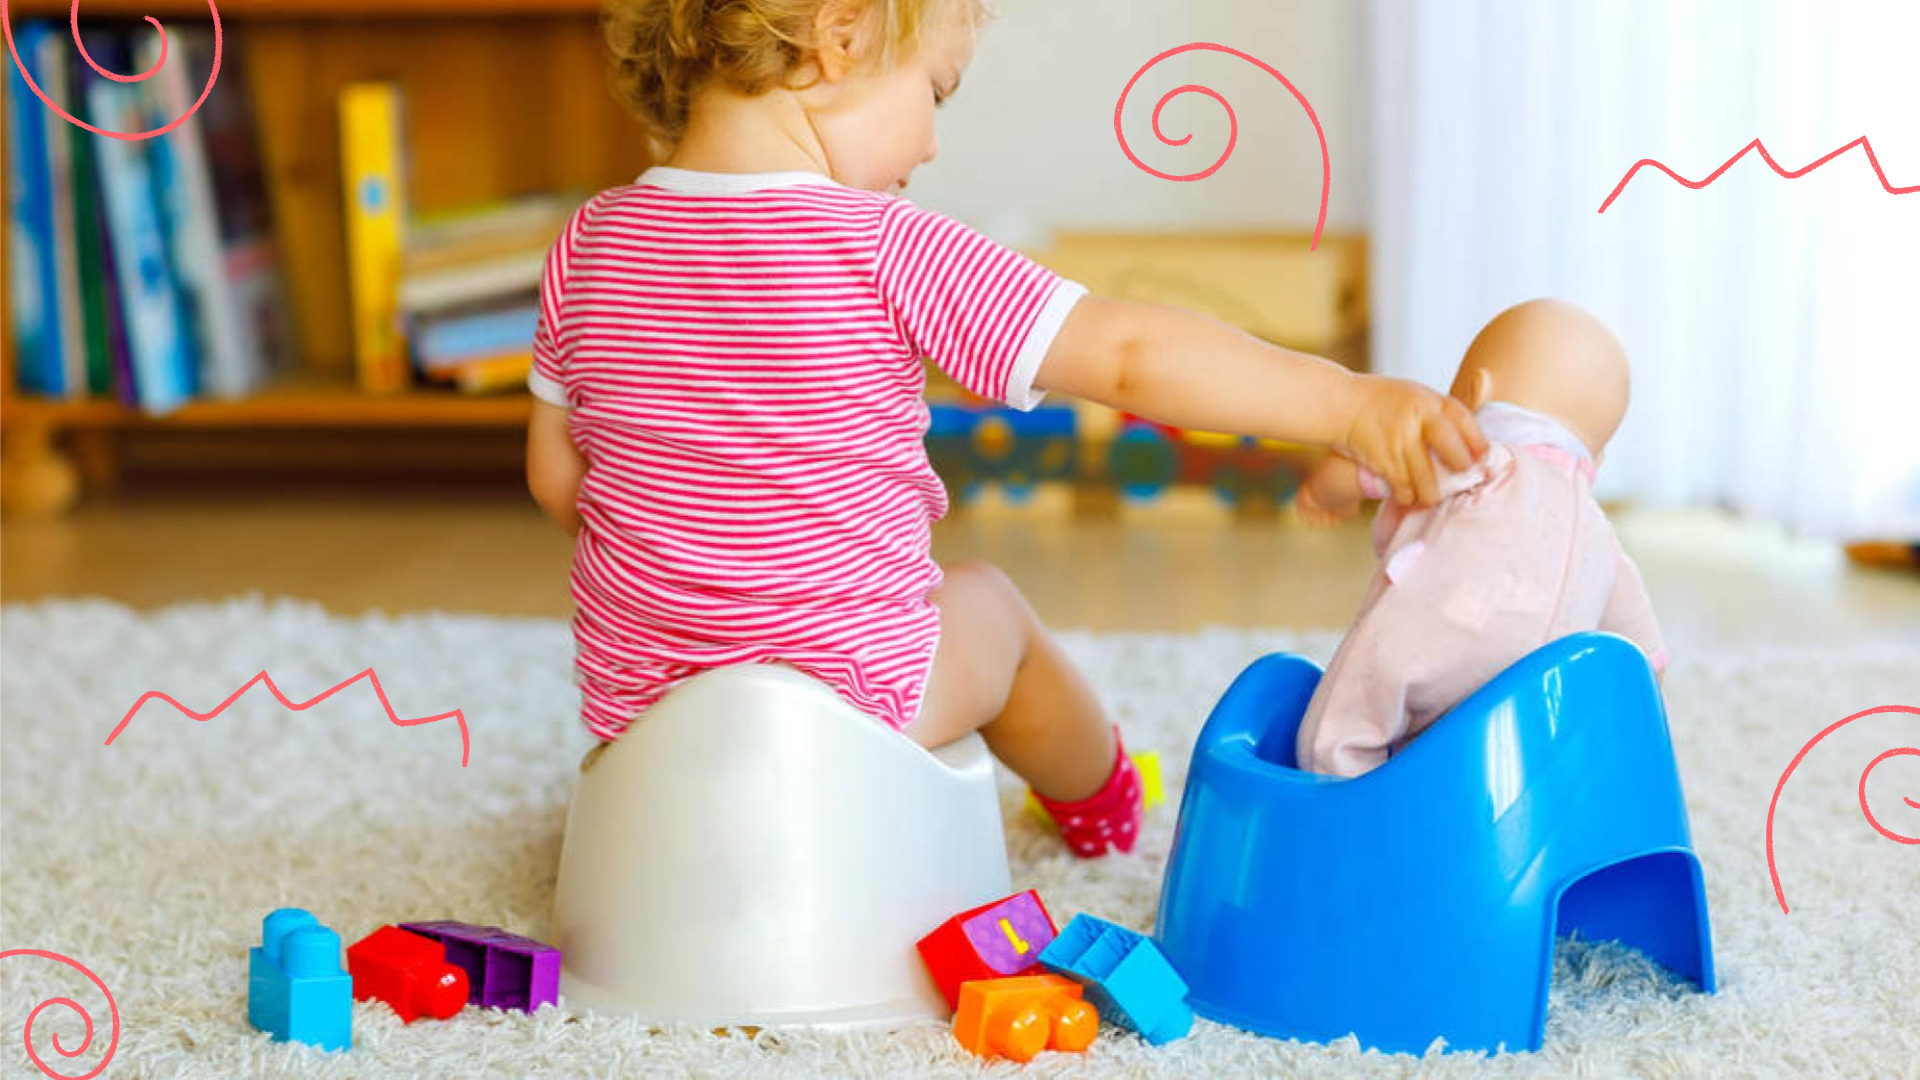 Potty Training: When to Start and How to Do It